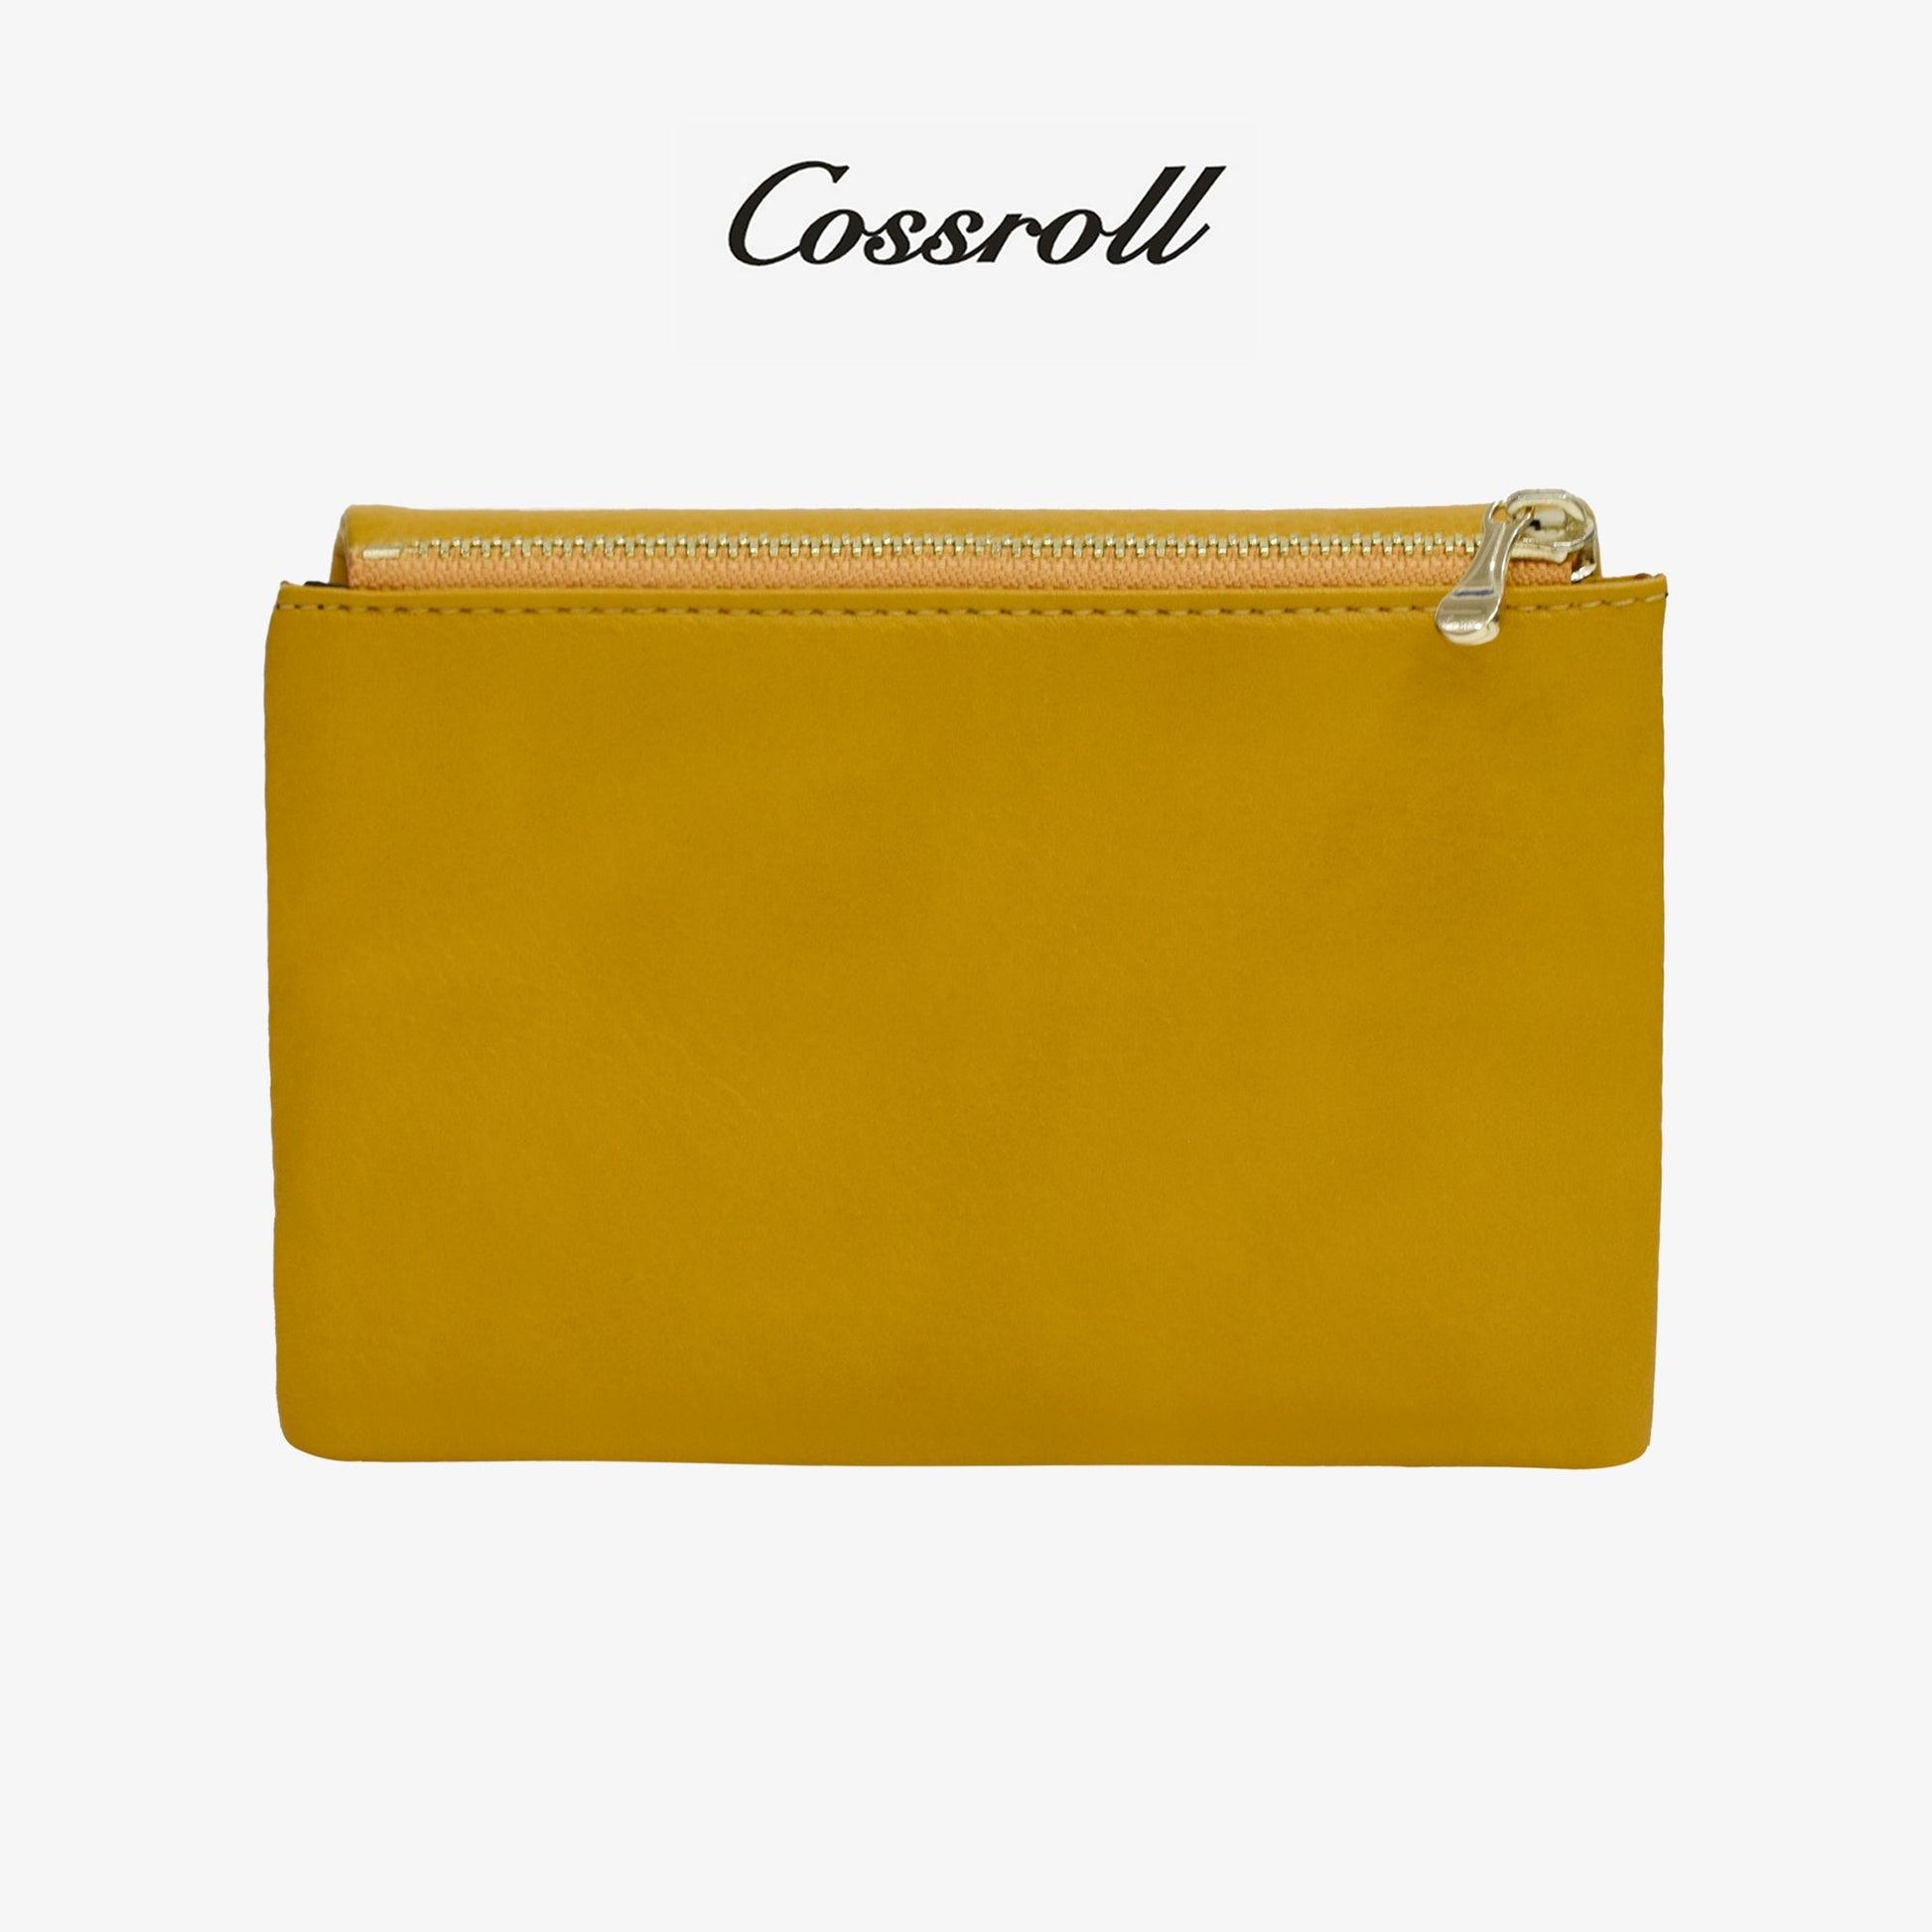 Ladies Leather Bifold Short Wallet - cossroll.leather